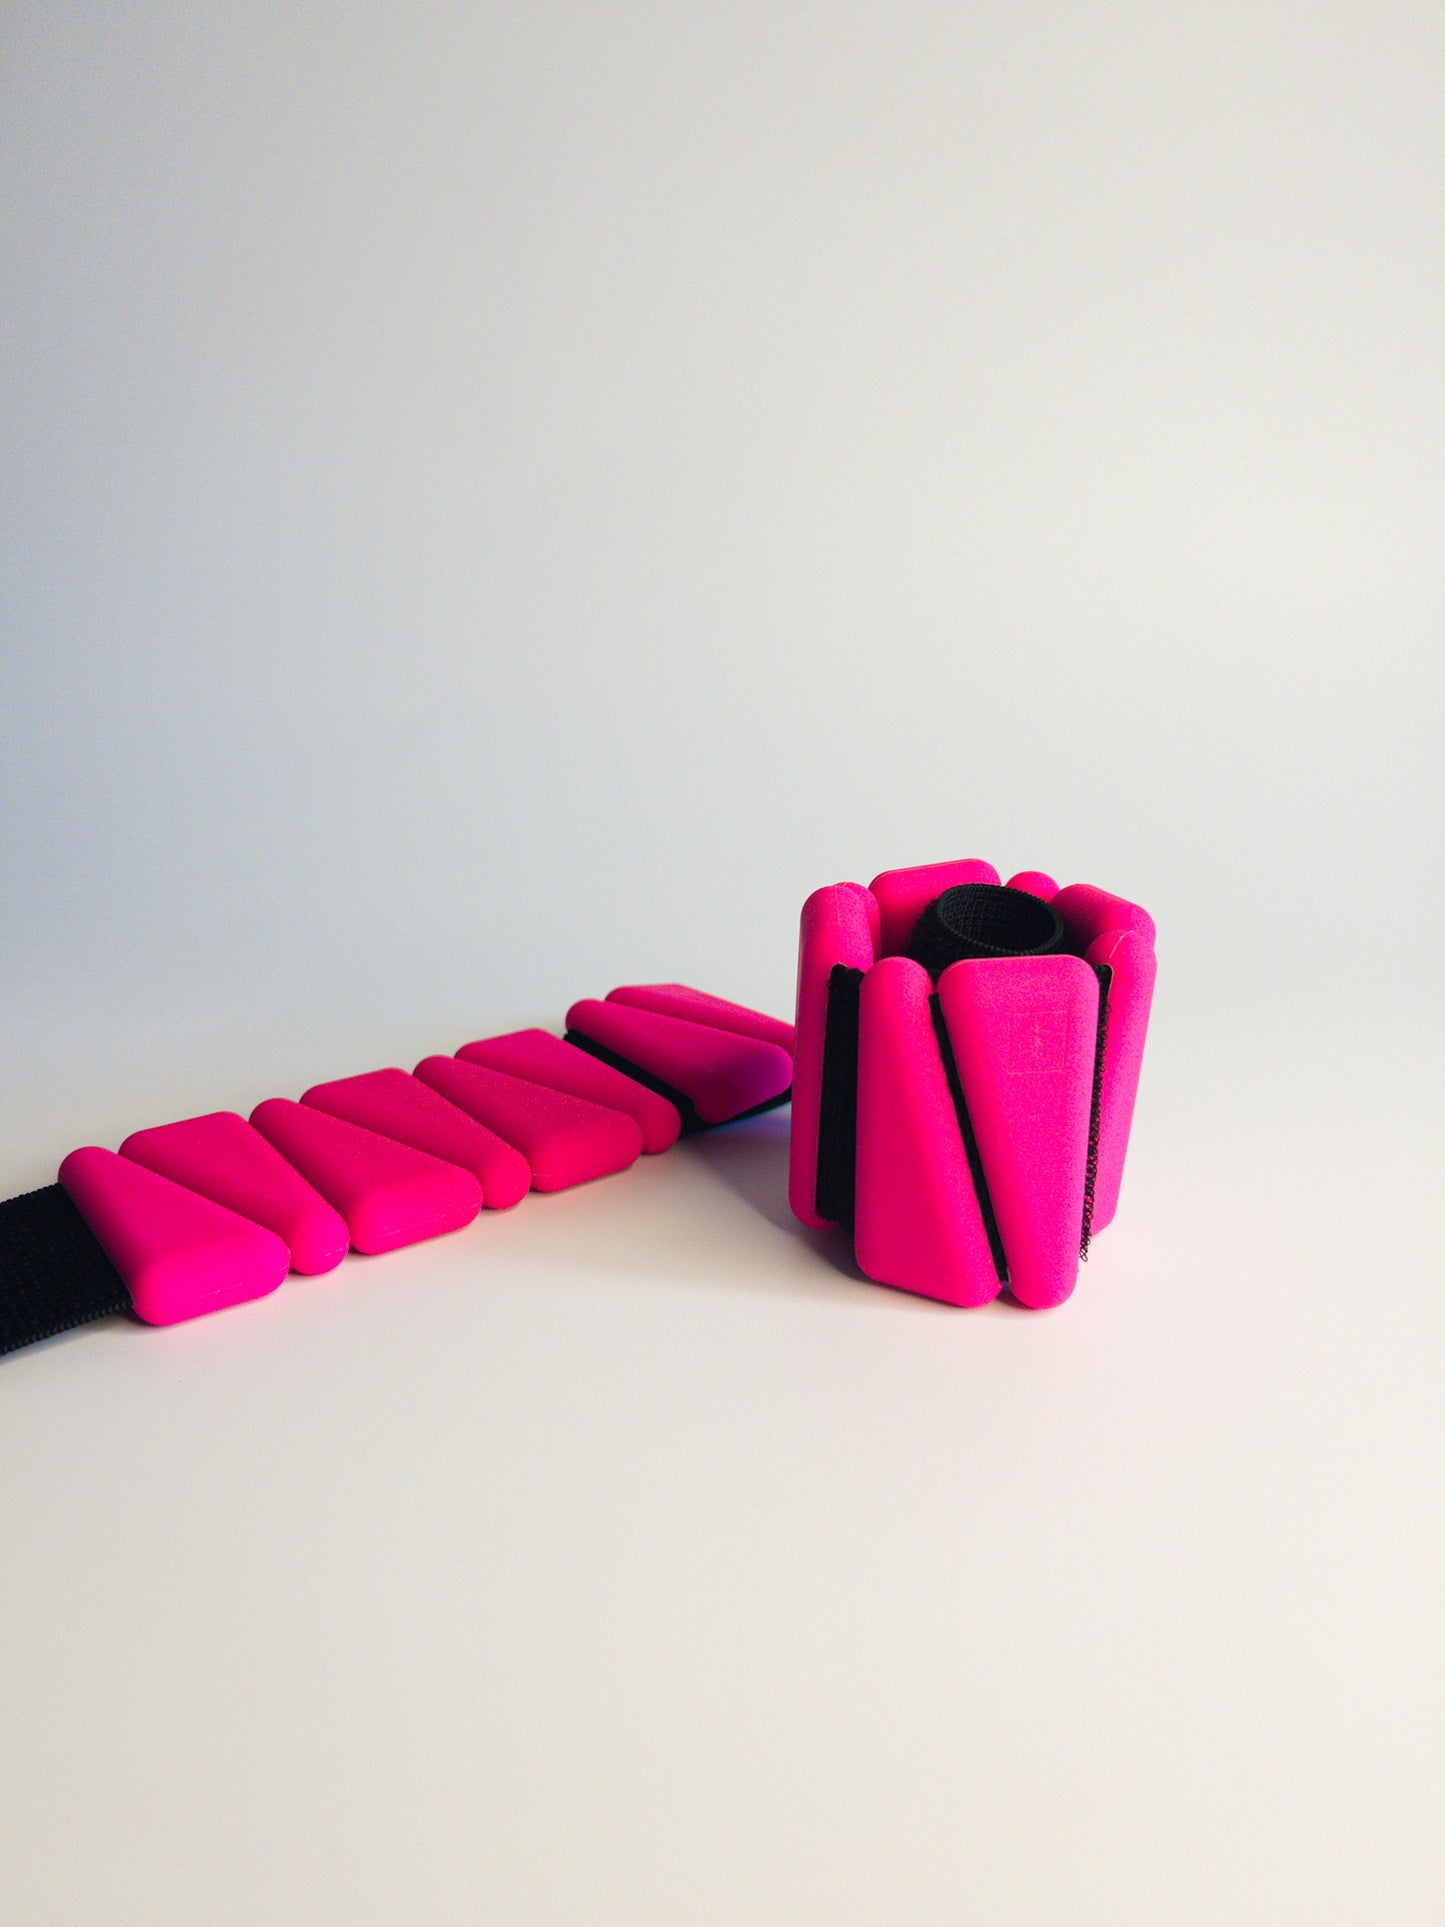 Amp Tone up wrist ankle weights 2lb neon pink